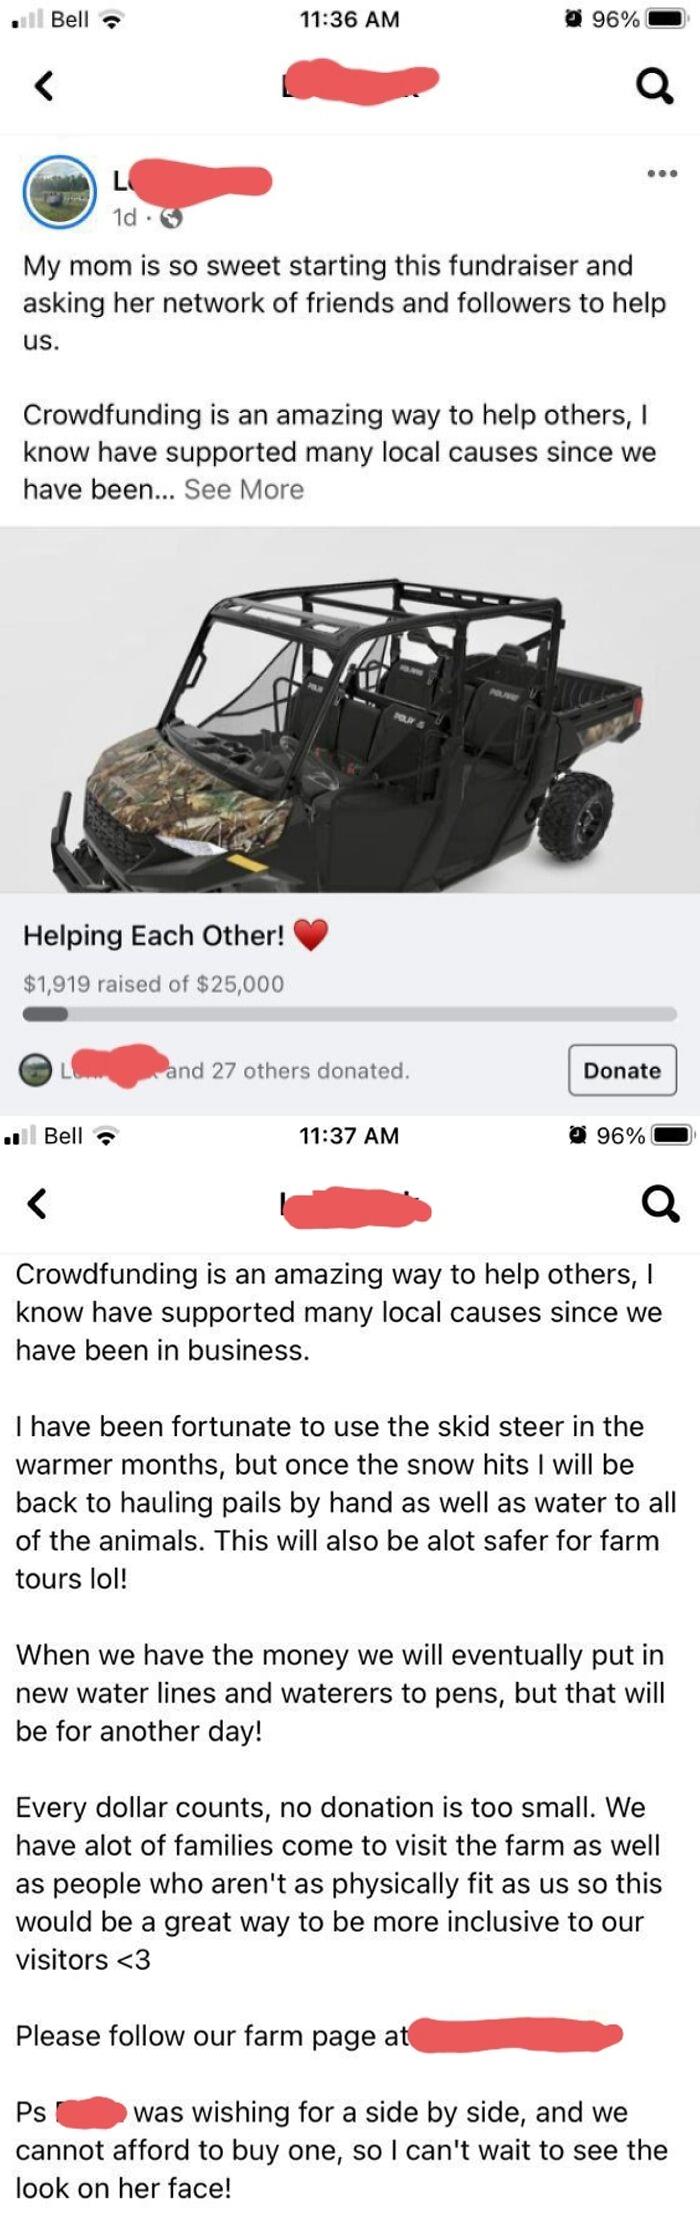 Cb Farmer Starts Gofundme To Get A 25k Quad. Uses Kid To Encourage Donations